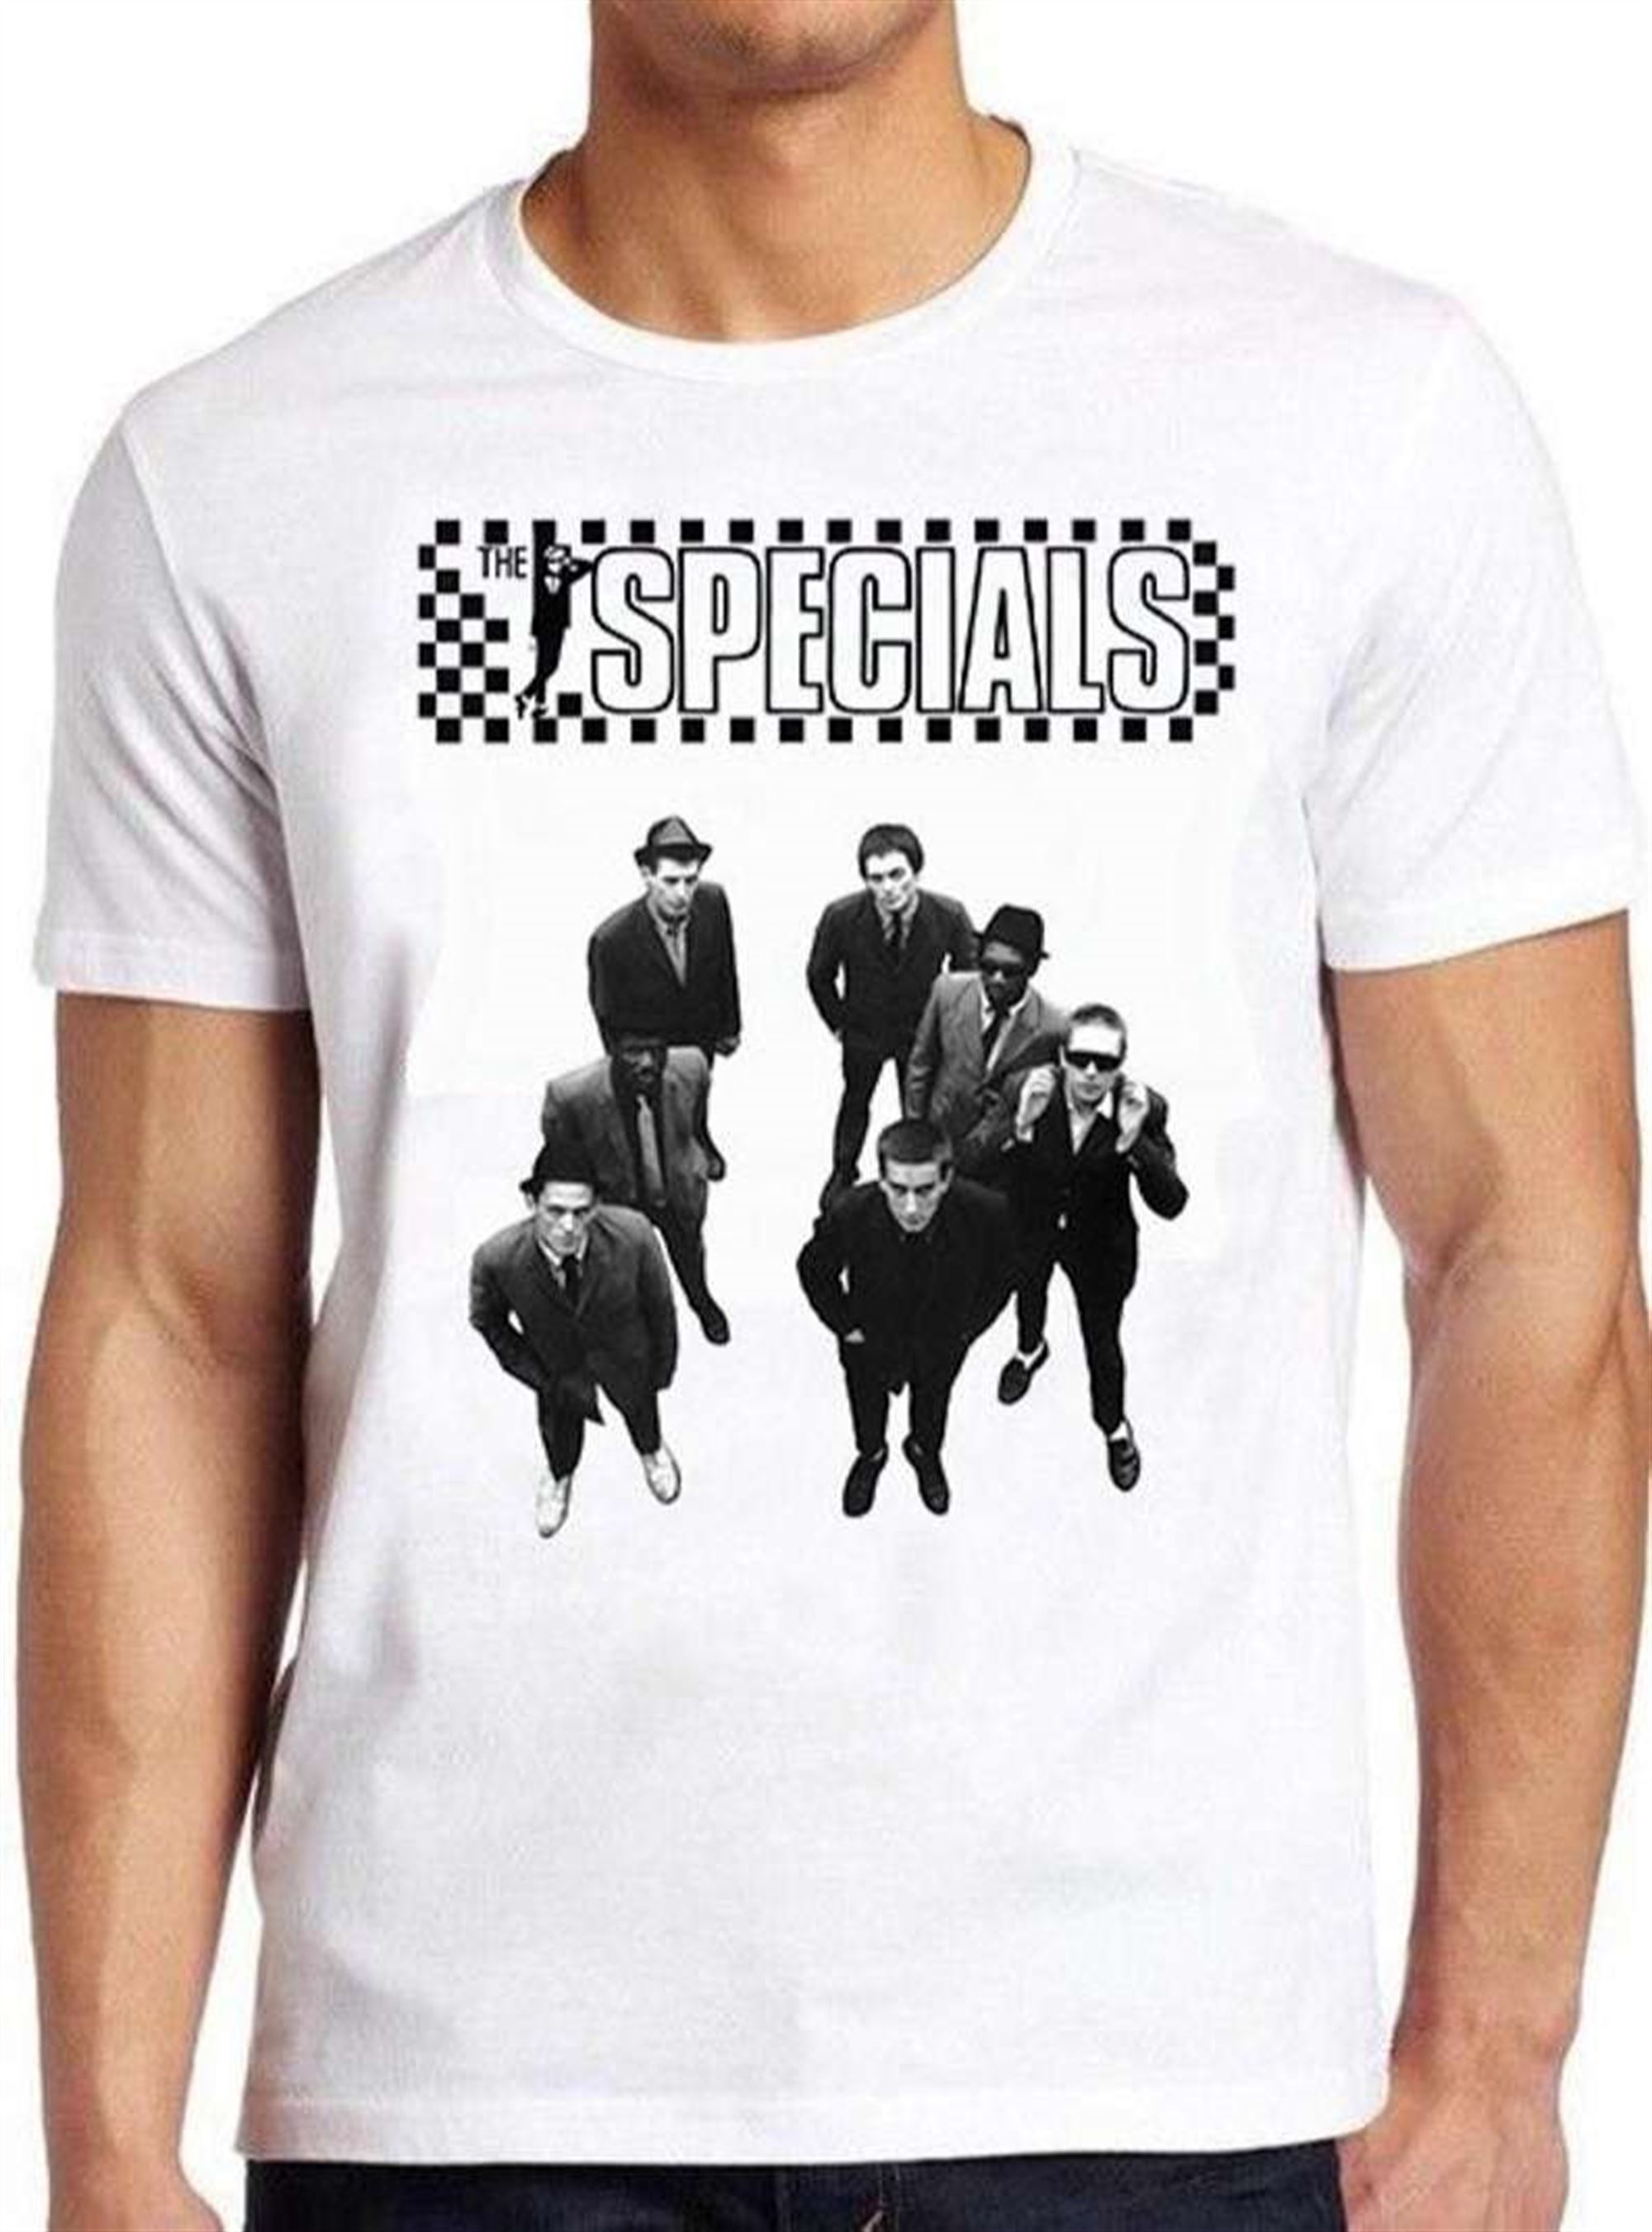 The Specials Unisex T Shirt Plus Size Up To 5xl